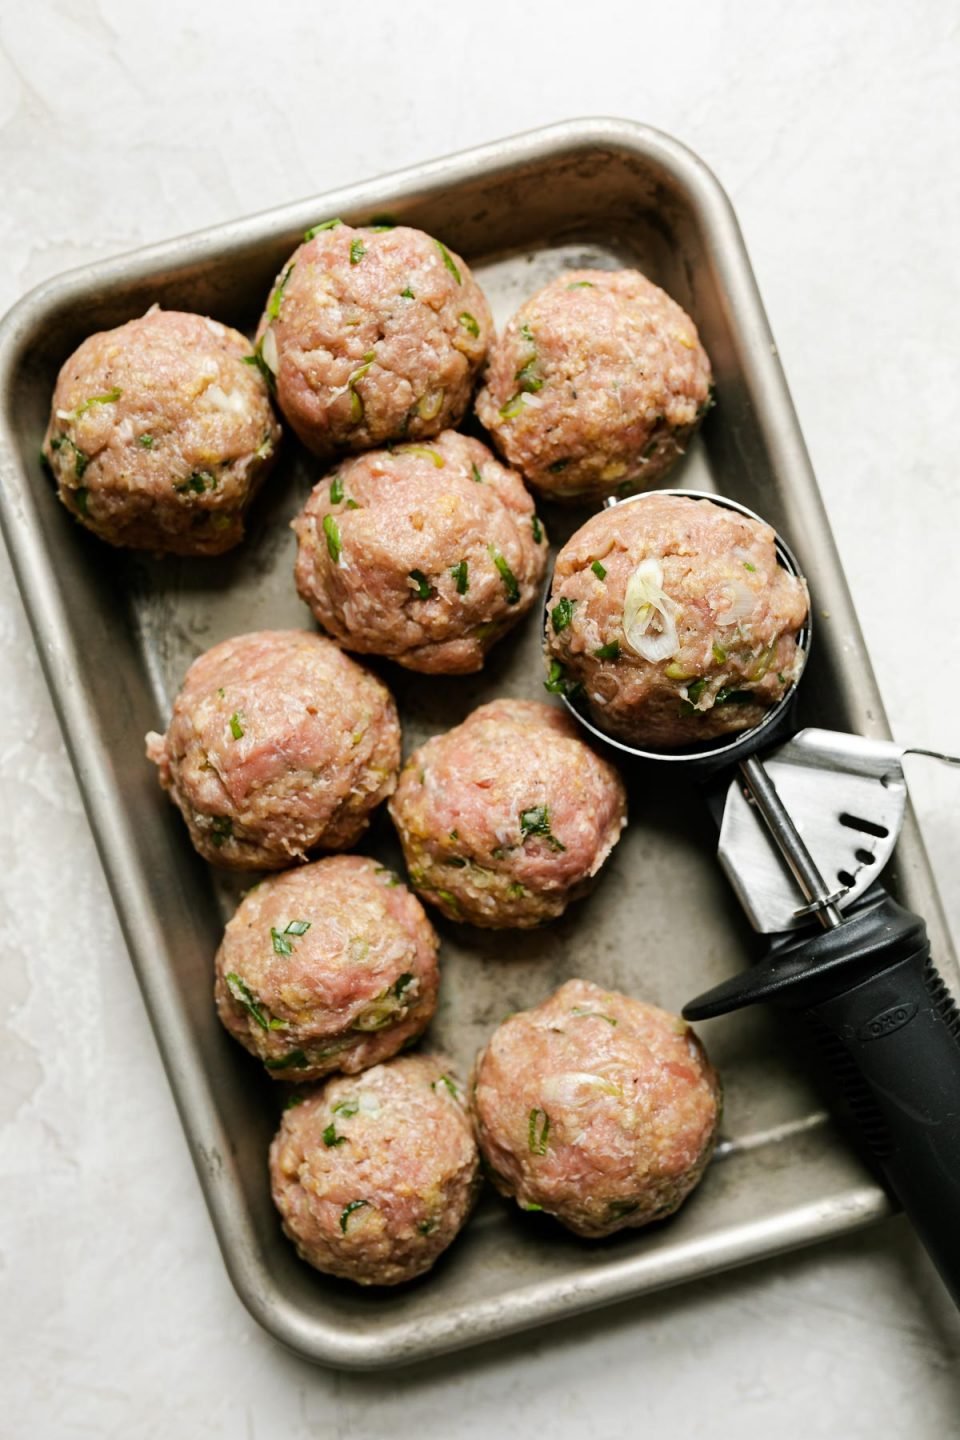 Rolling out ginger meatballs – 9 large turkey meatballs on a small baking sheet with a 10th meatball in a scoop alongside them. The baking sheet sits atop a creamy cement surface.